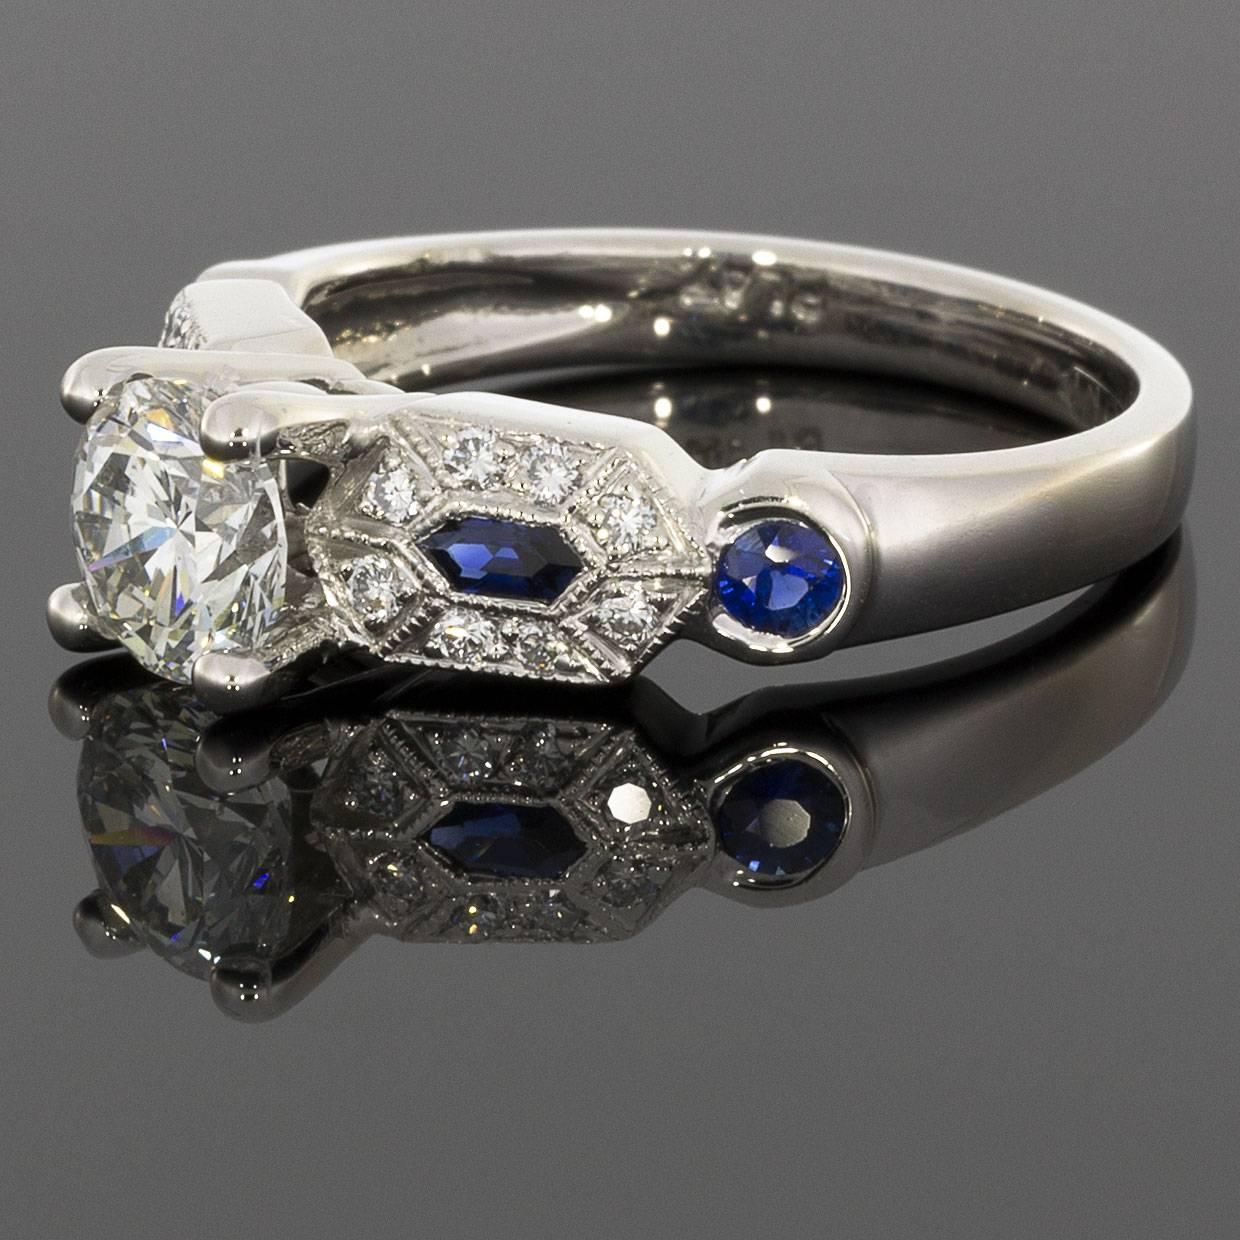 This gorgeous engagement ring is from the designer Tacori. Handcrafted in California, every Tacori piece demonstrates exquisite artistry with beauty radiating from every angle. Tacori is known for creating some of the most desired rings in the